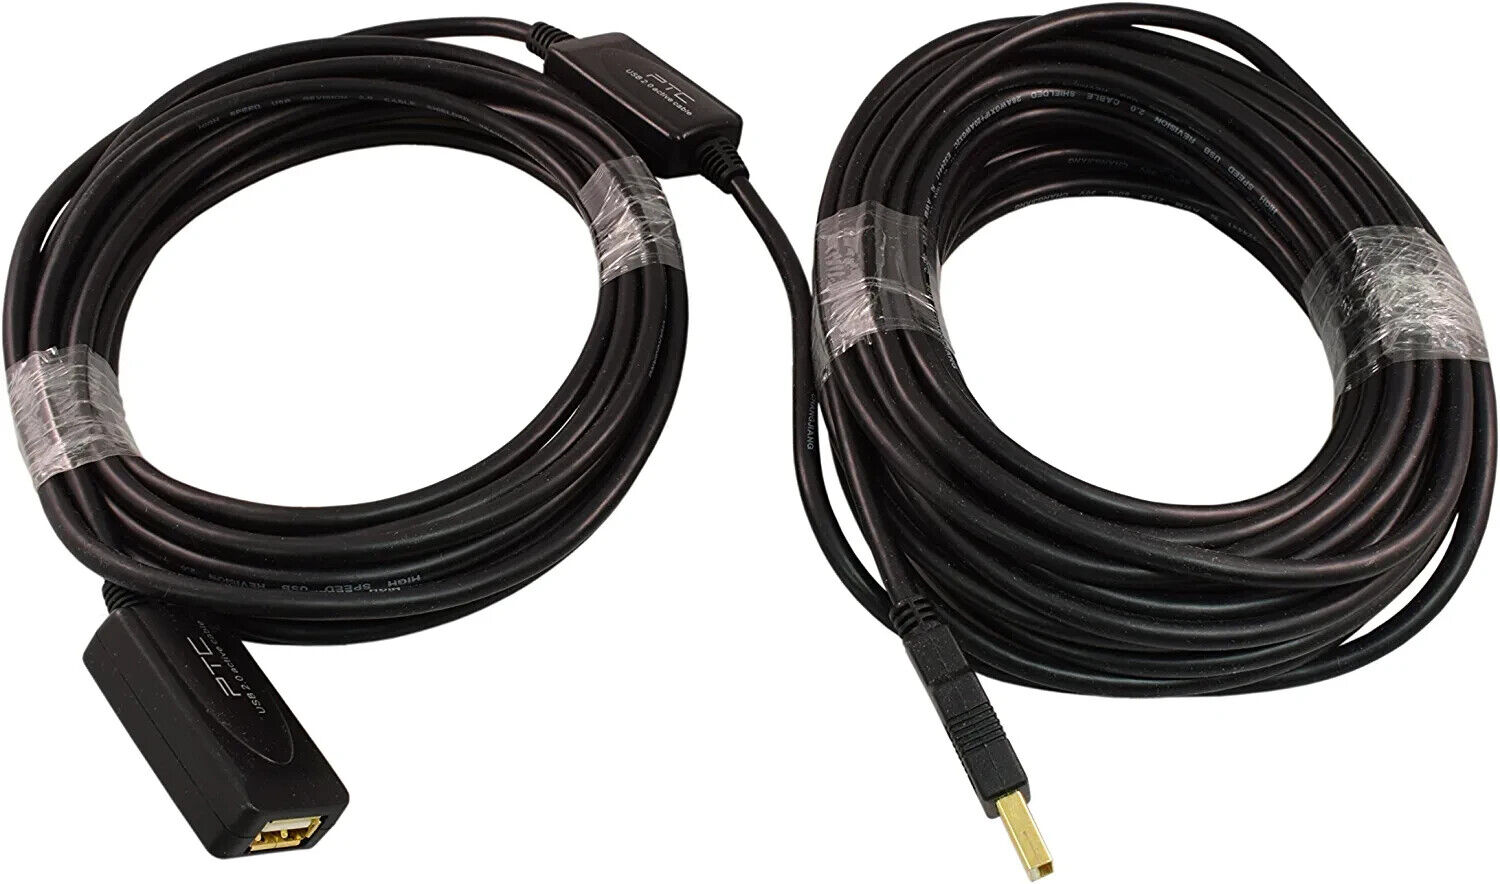 49FT (15M) PTC USB 2.0 Active Repeater Extension M/F Cable - Supports High Speed